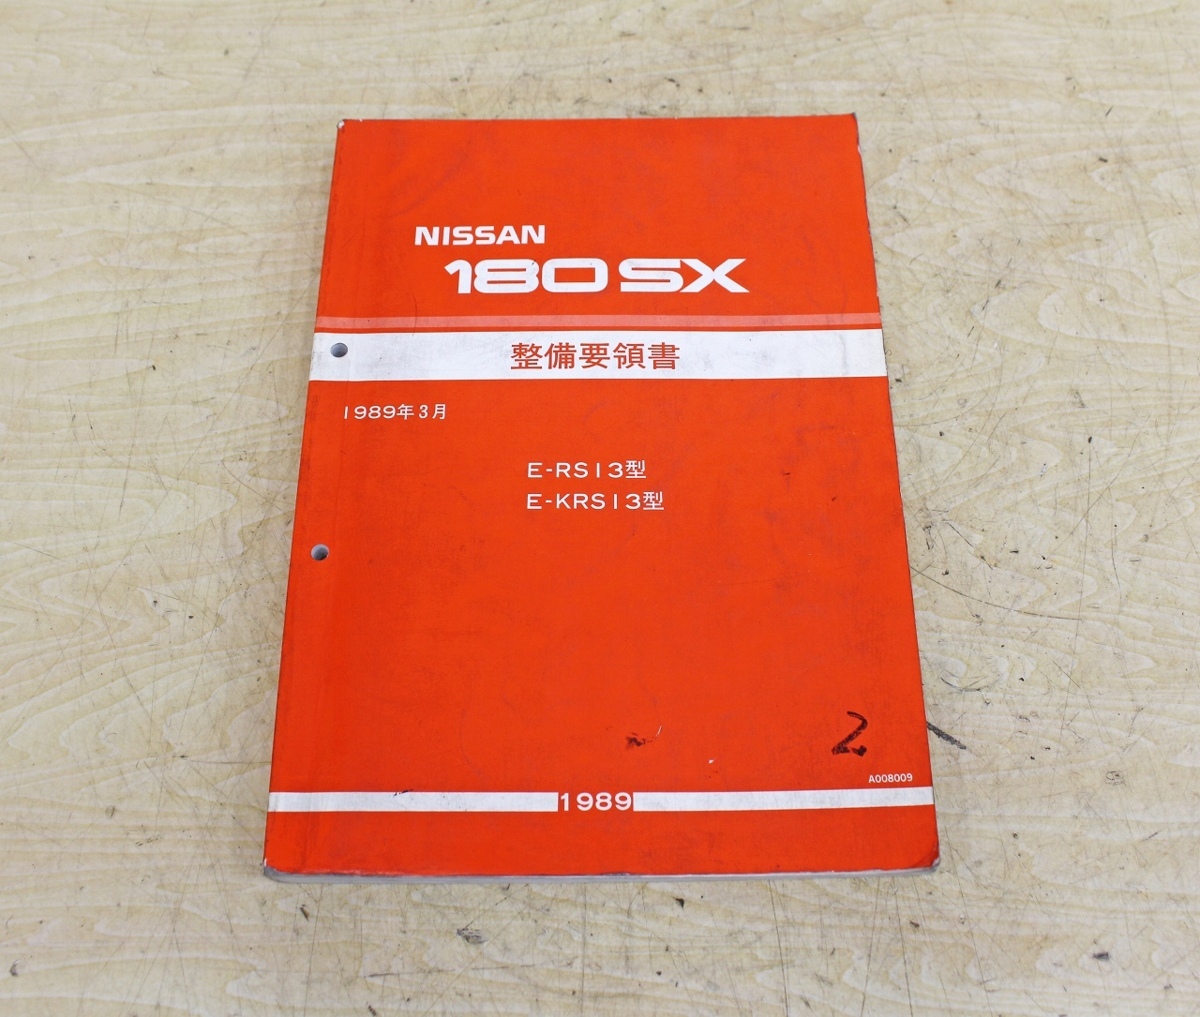 7716A20 NISSAN 日産自動車 整備要領書 180SX まとめて3冊セット